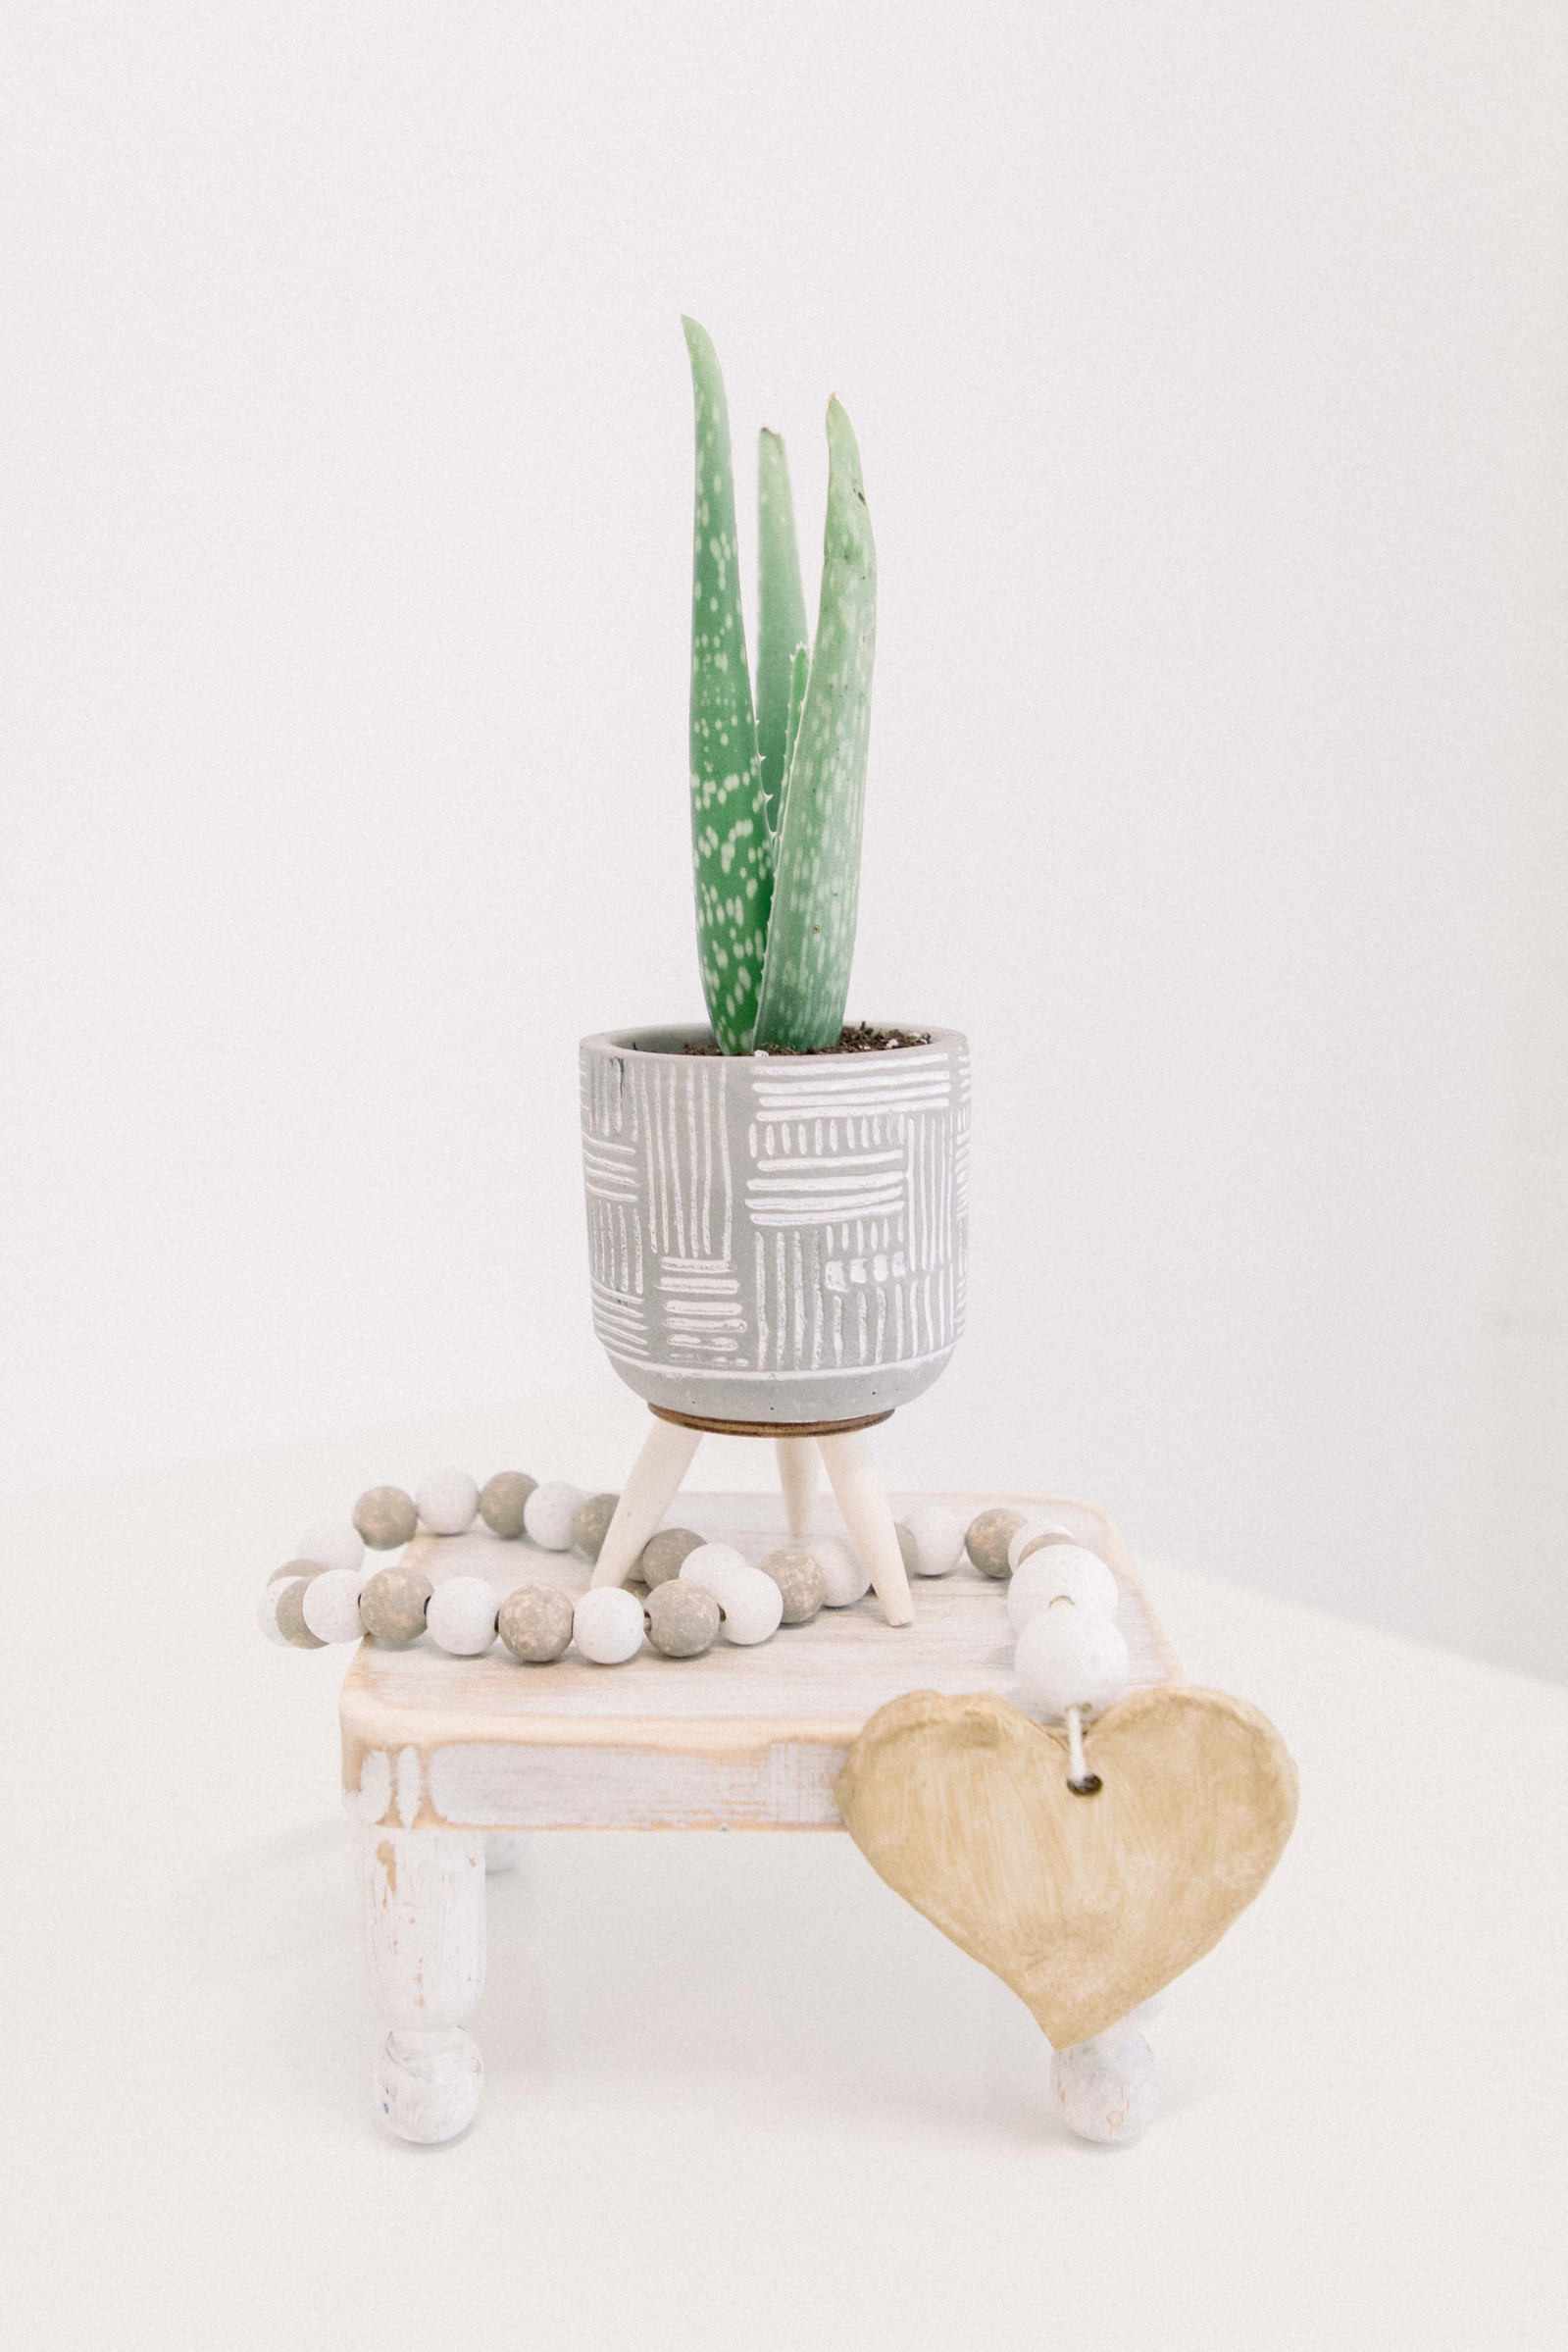 Product photo of plant sitting on handmade wooden shelf, with a handmade wooden garland around it. Emily VanderBeek Photography, branding photography, portrait photography, Niagara portrait photographer, Niagara branding photographer.